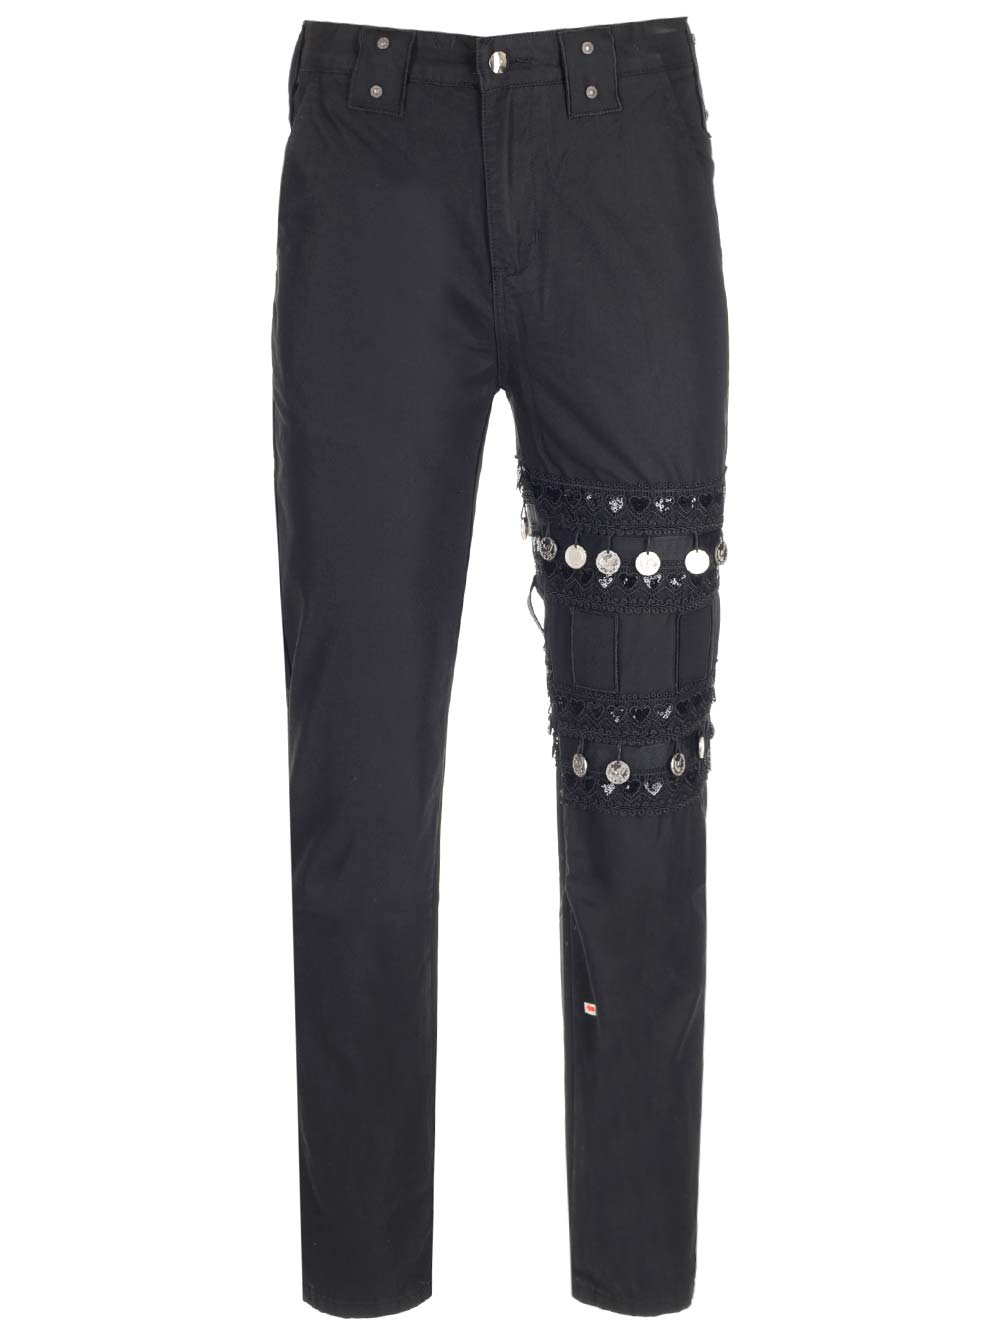 YOUTHS IN BALACLAVA COTTON-BLEND TWILL TROUSERS